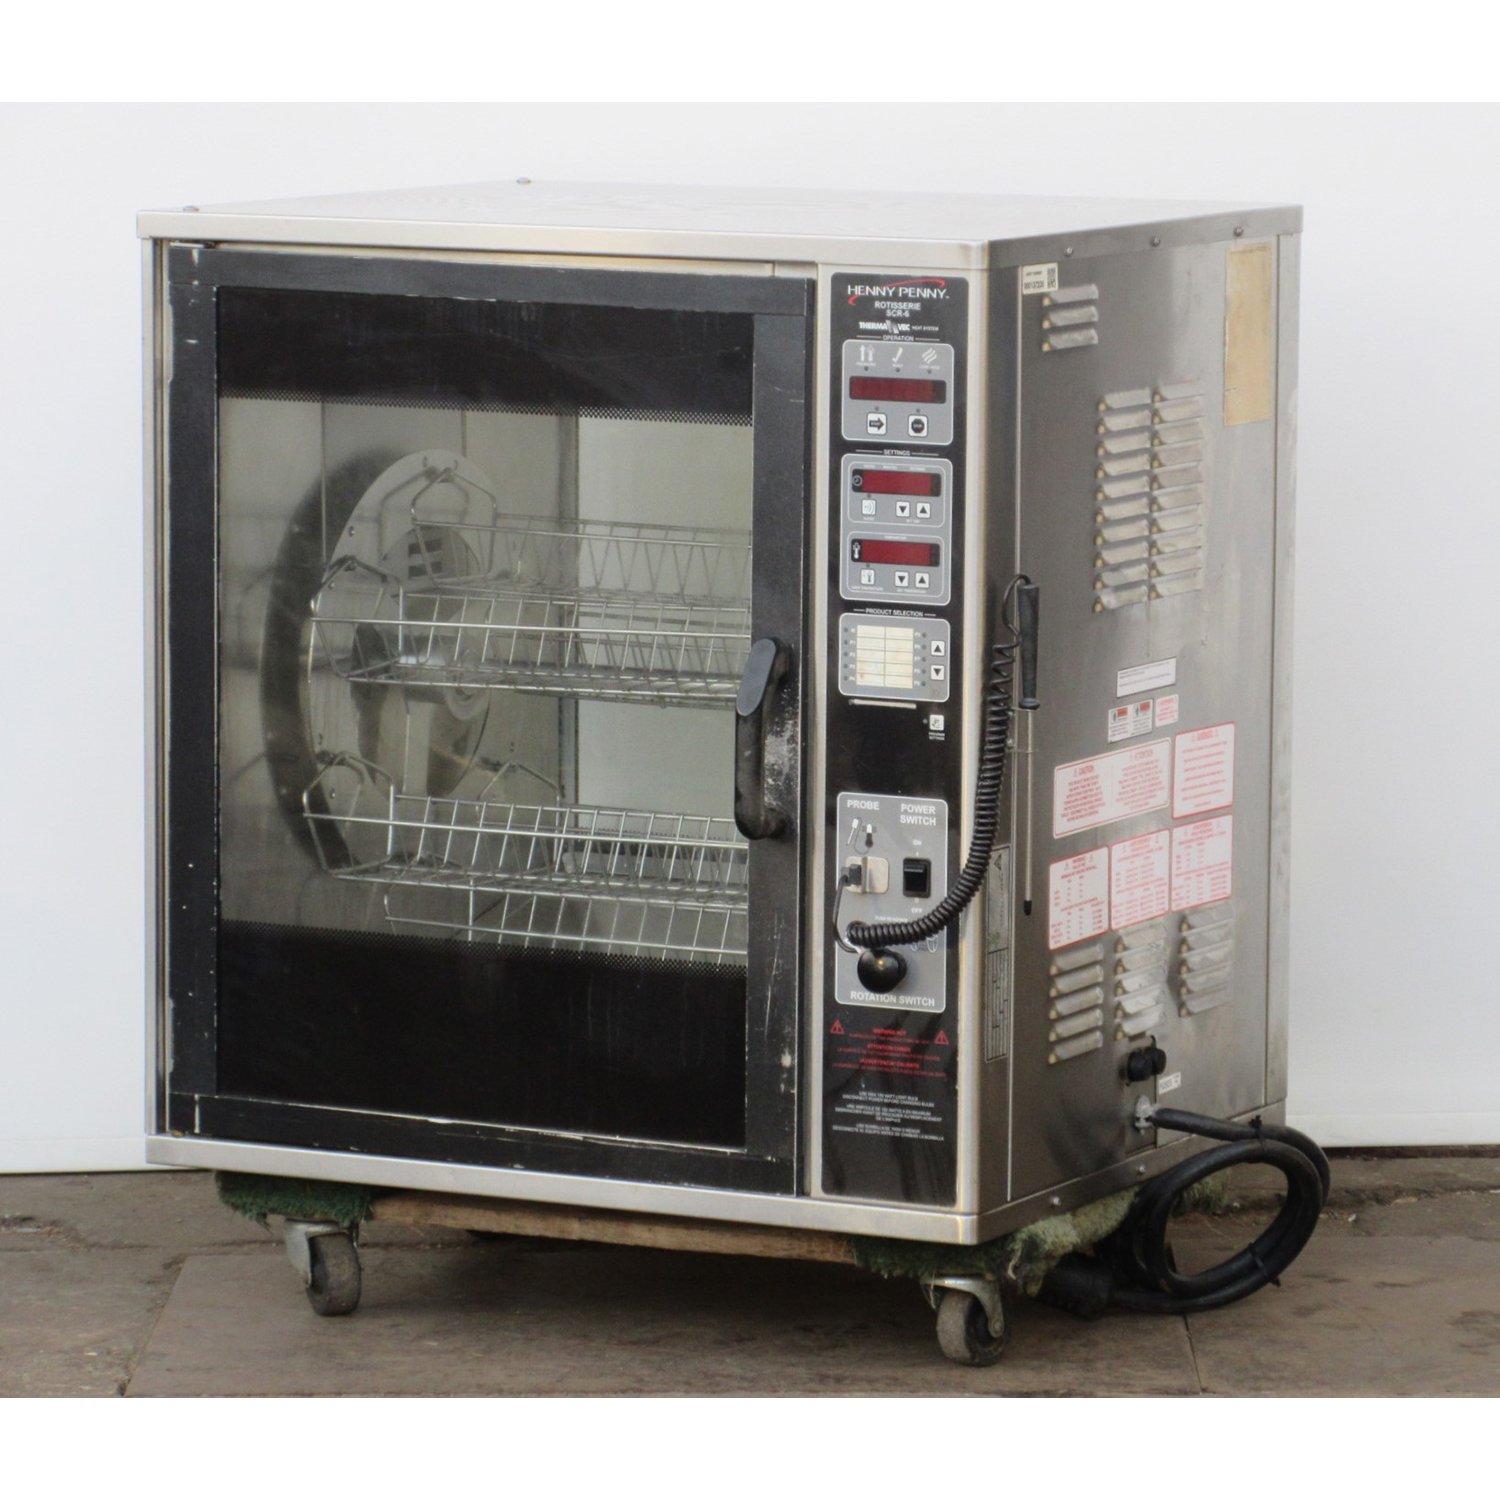 Henny Penny SCR-6 Electric Rotisserie, Countertop, Used Excellent Condition